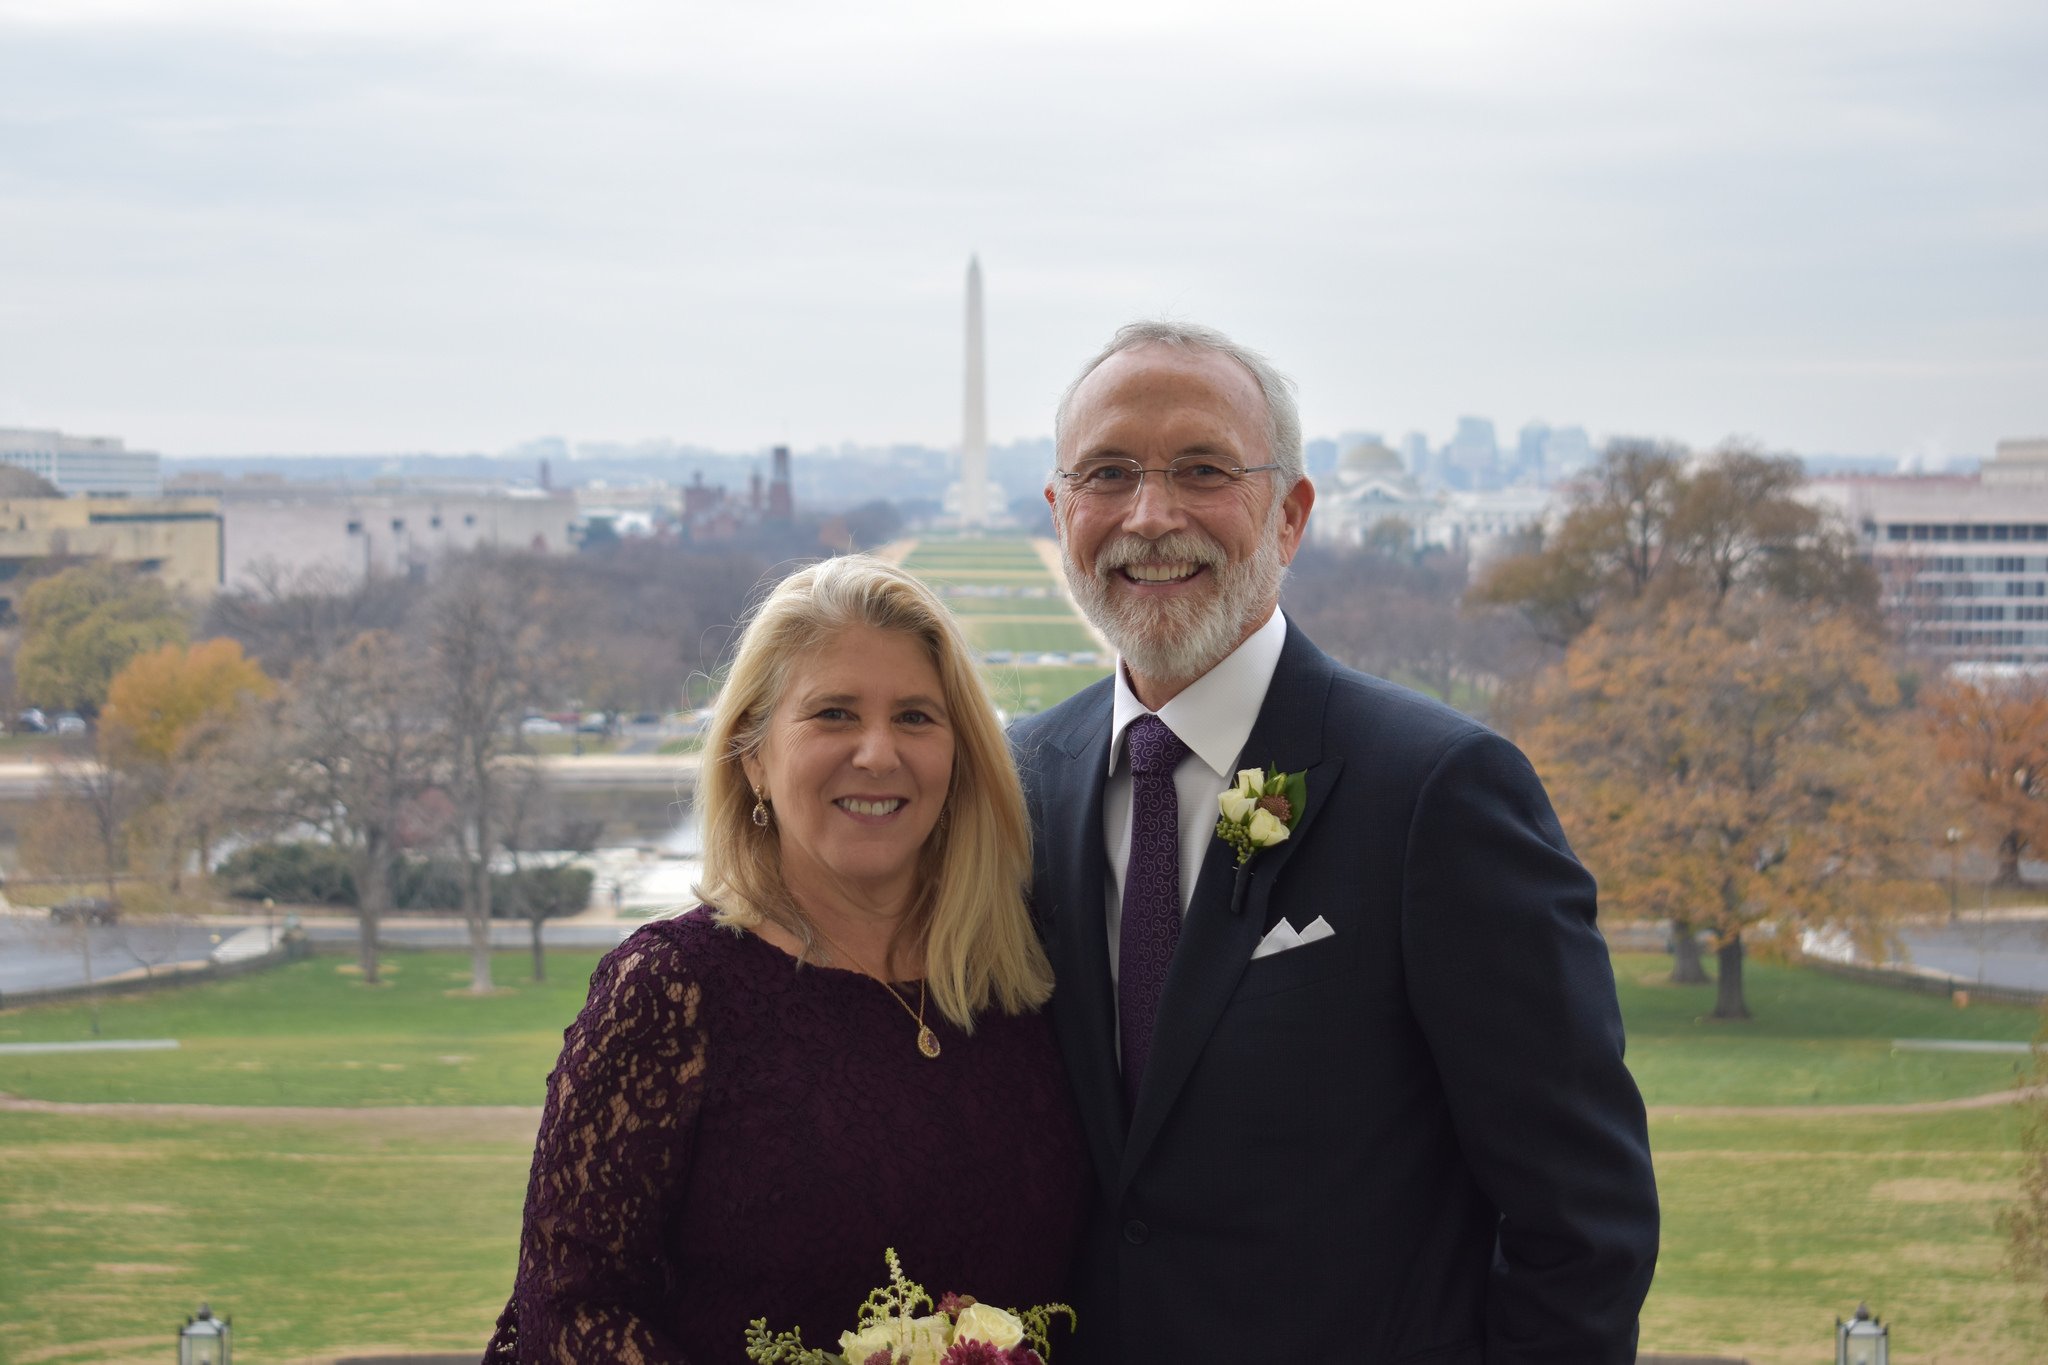 Washington Republican Rep. Dan Newhouse married Joan Galvin at the U.S. Capitol Friday. Photo courtesy of Newhouse's office